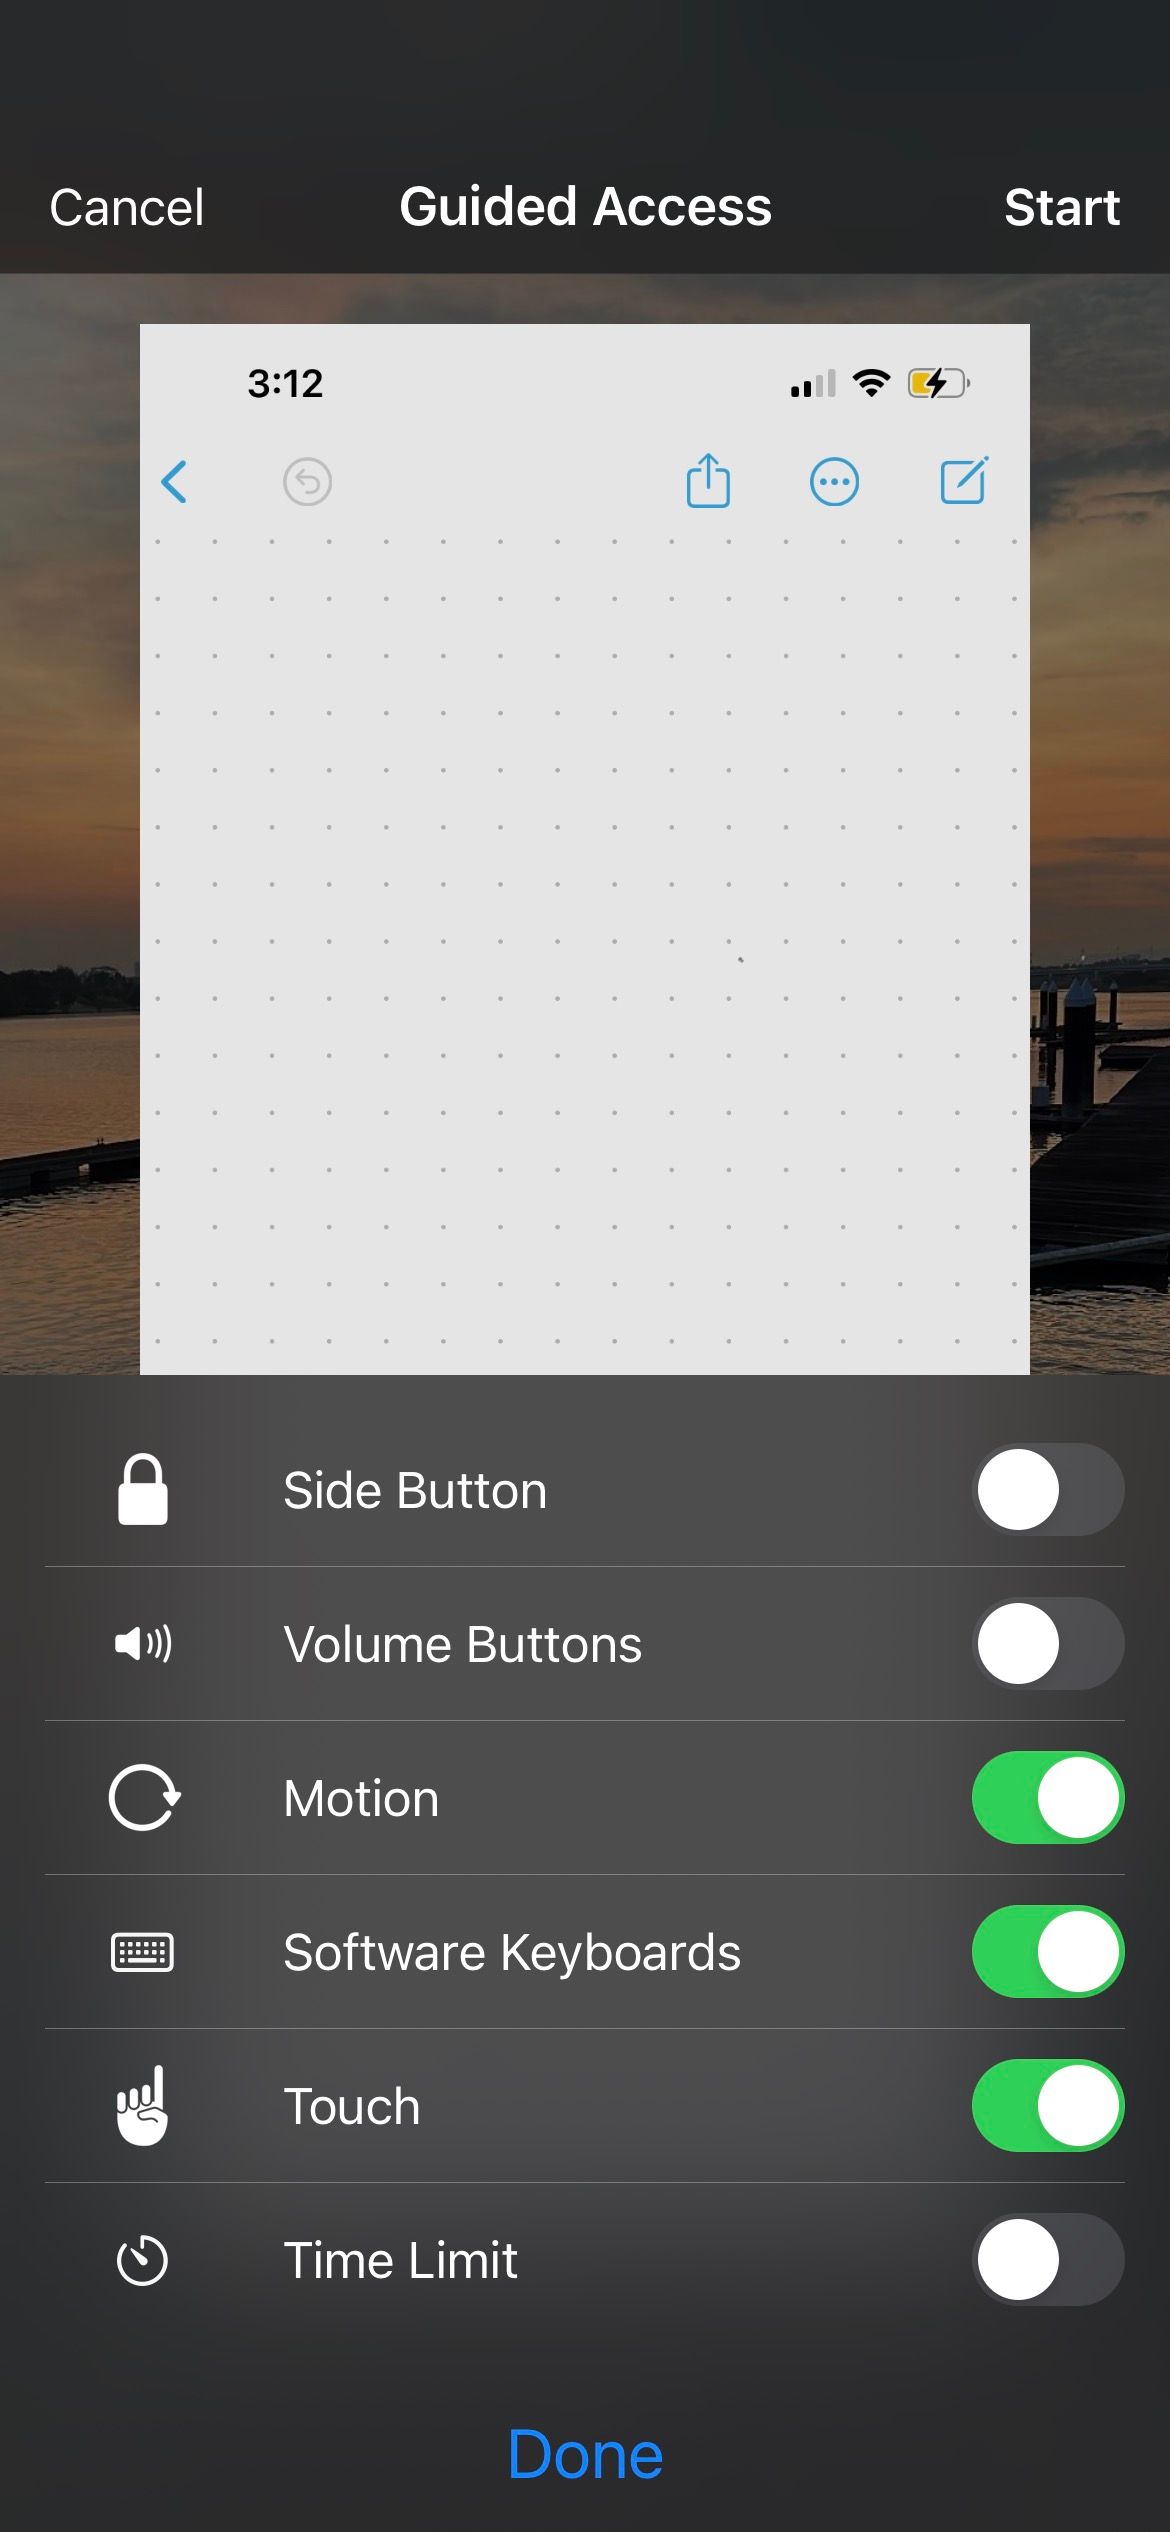 iphone guided access options